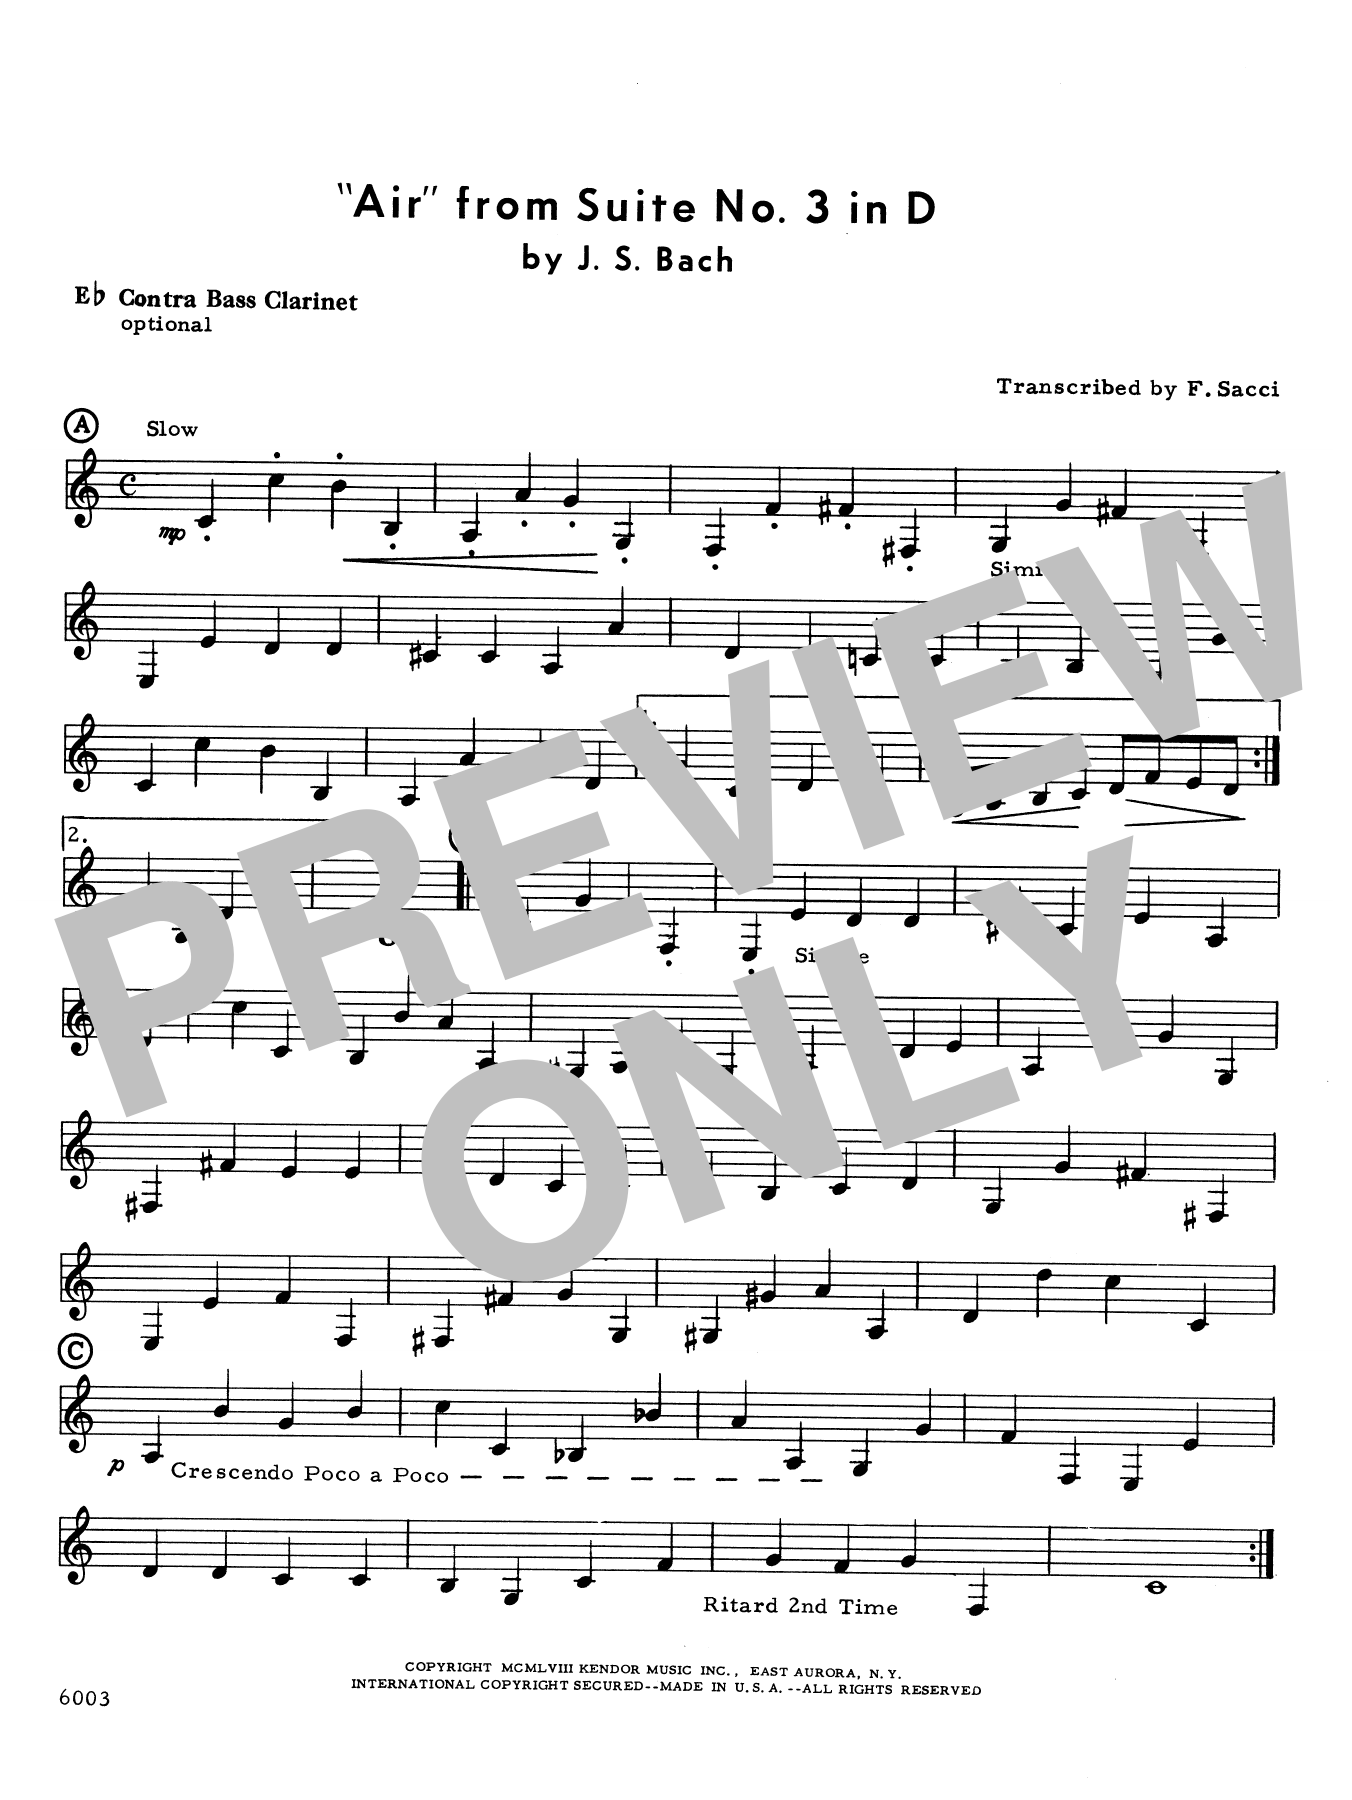 Download Frank J. Sacci Air From Suite #3 In D - Bb Contra Bass Sheet Music